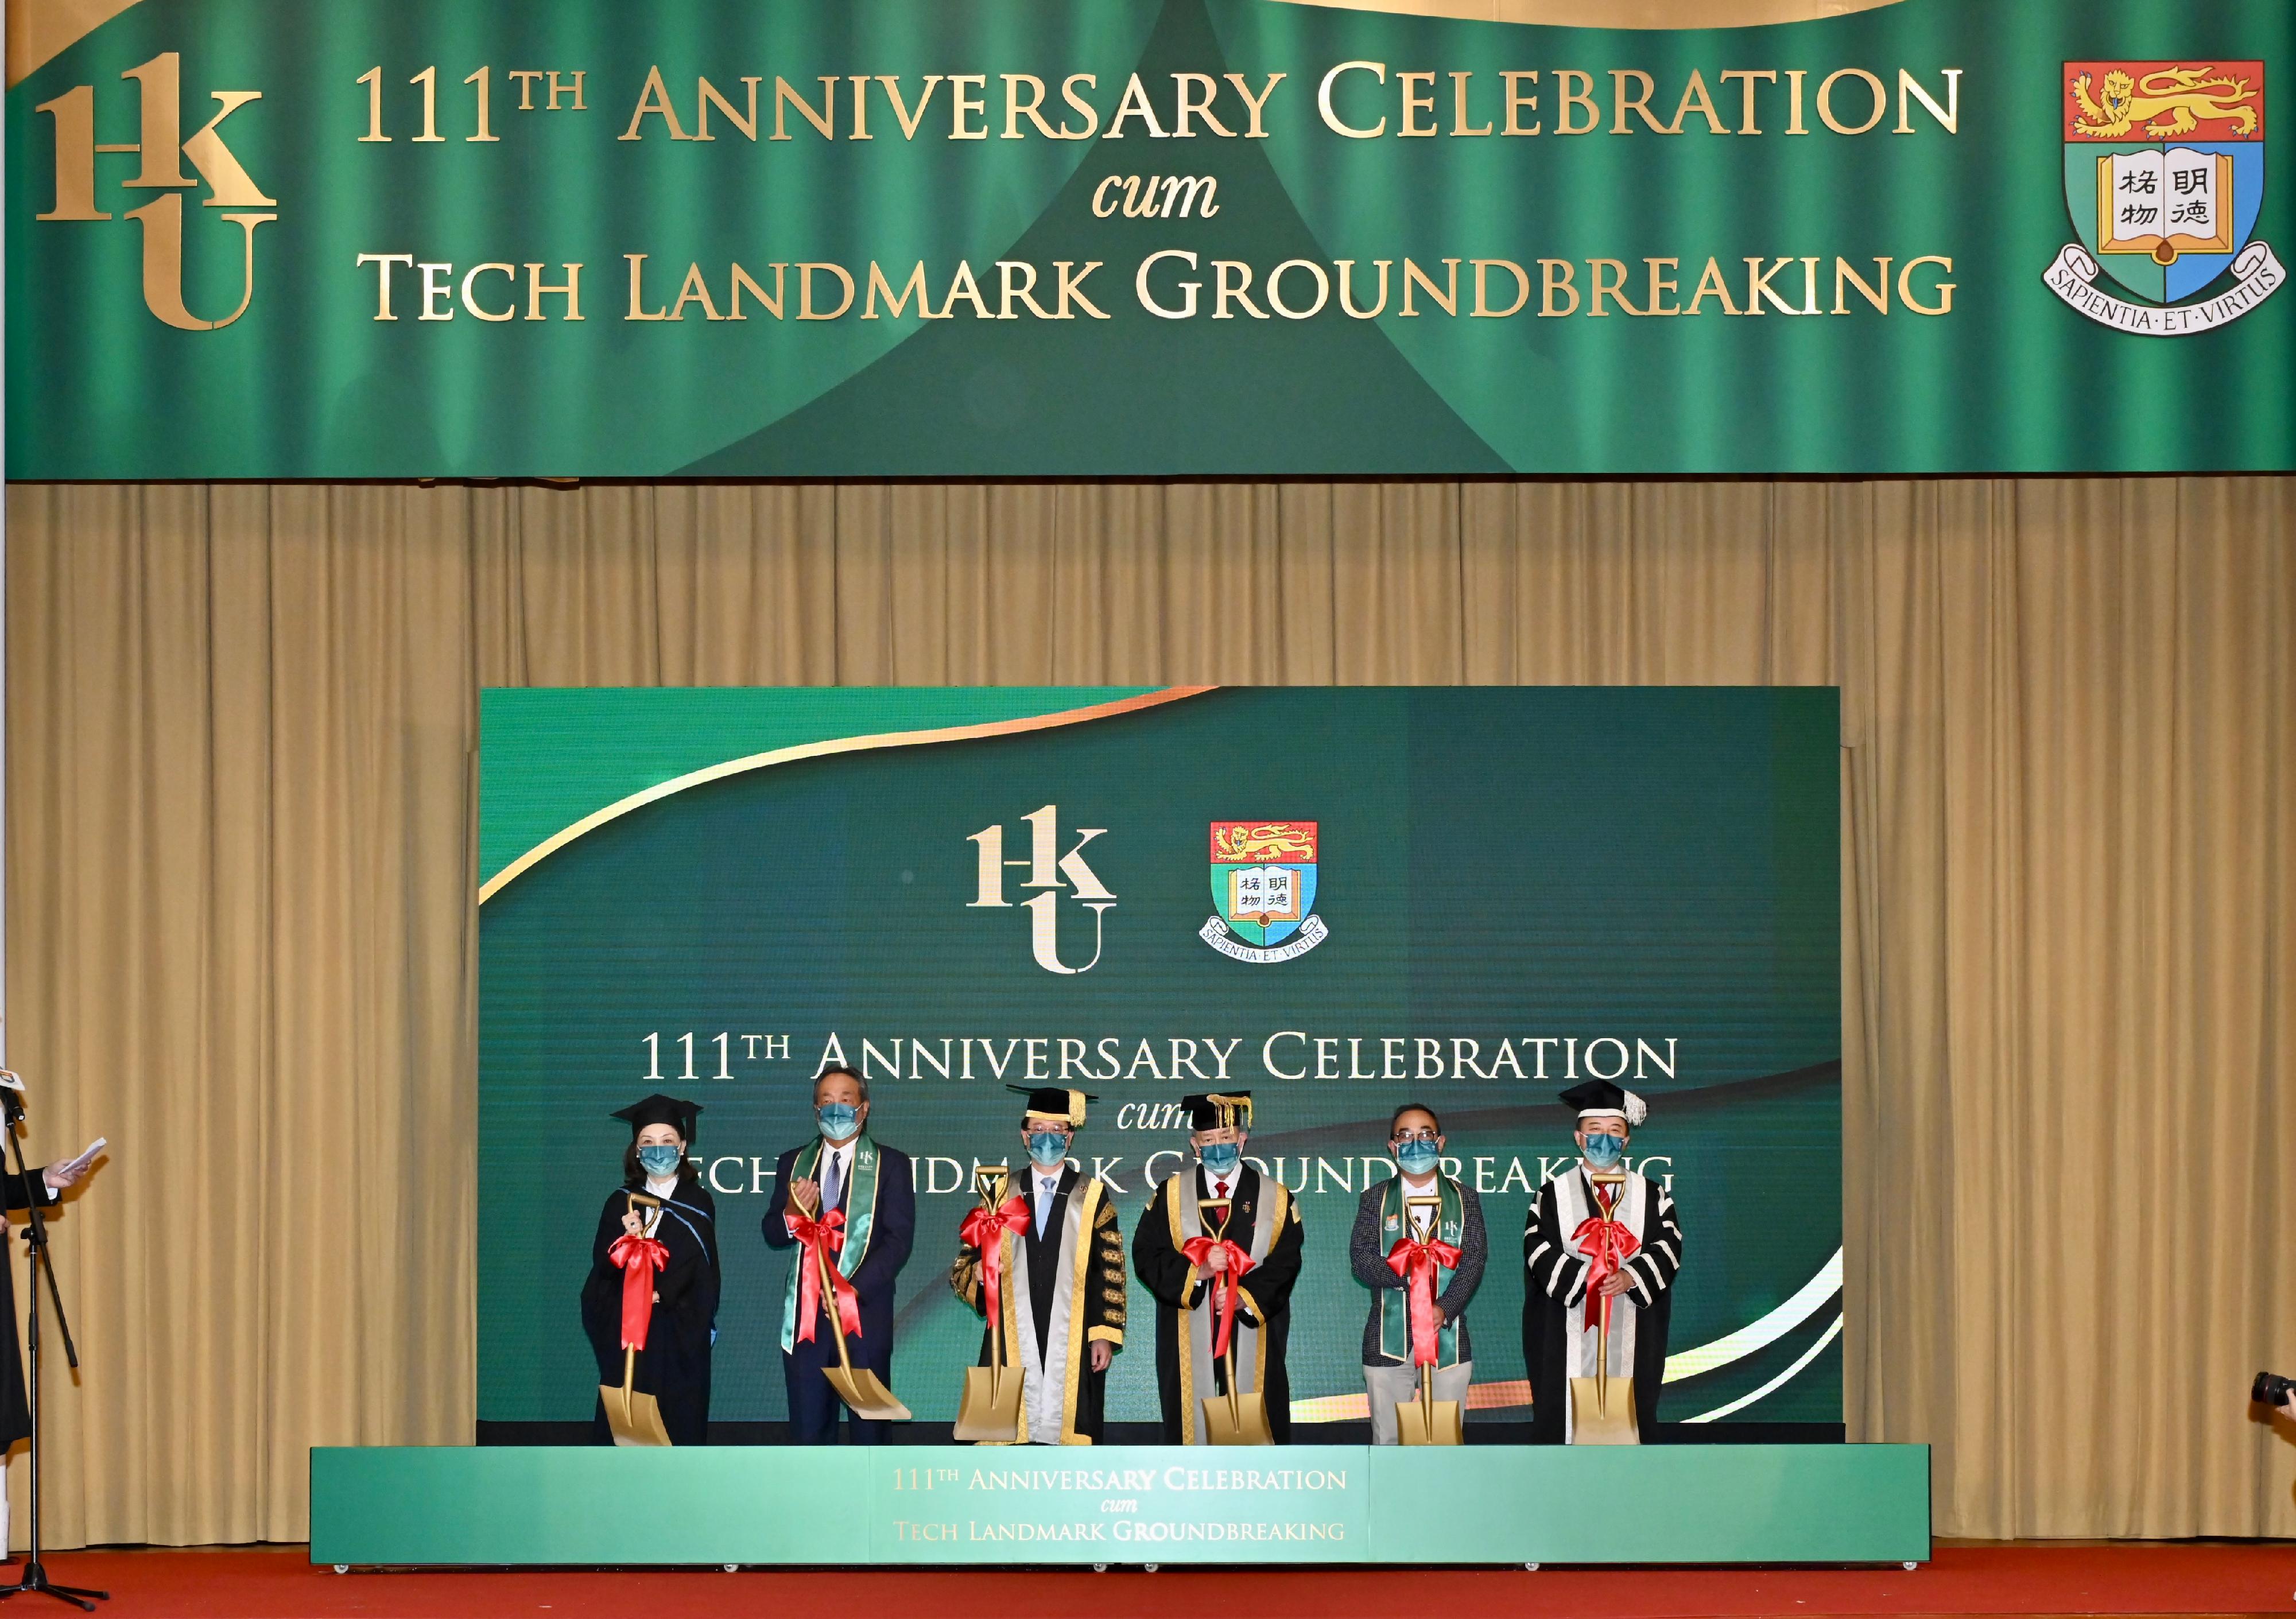 The Chief Executive, Mr John Lee, attended the University of Hong Kong 111th Anniversary Celebration-cum-Tech Landmark Ground-breaking Ceremony today (July 23). Photo shows (from left) the Chairman of the University of Hong Kong (HKU) Council, Ms Priscilla Wong; the Chairman of Kerry Group, Mr Beau Kuok; Mr Lee; the Pro-Chancellor of HKU, Dr David Li; the Chairman and Chief Executive Officer of Shun Hing Group, Dr David Mong; and the President and Vice-Chancellor of HKU, Professor Zhang Xiang, at the ceremony.